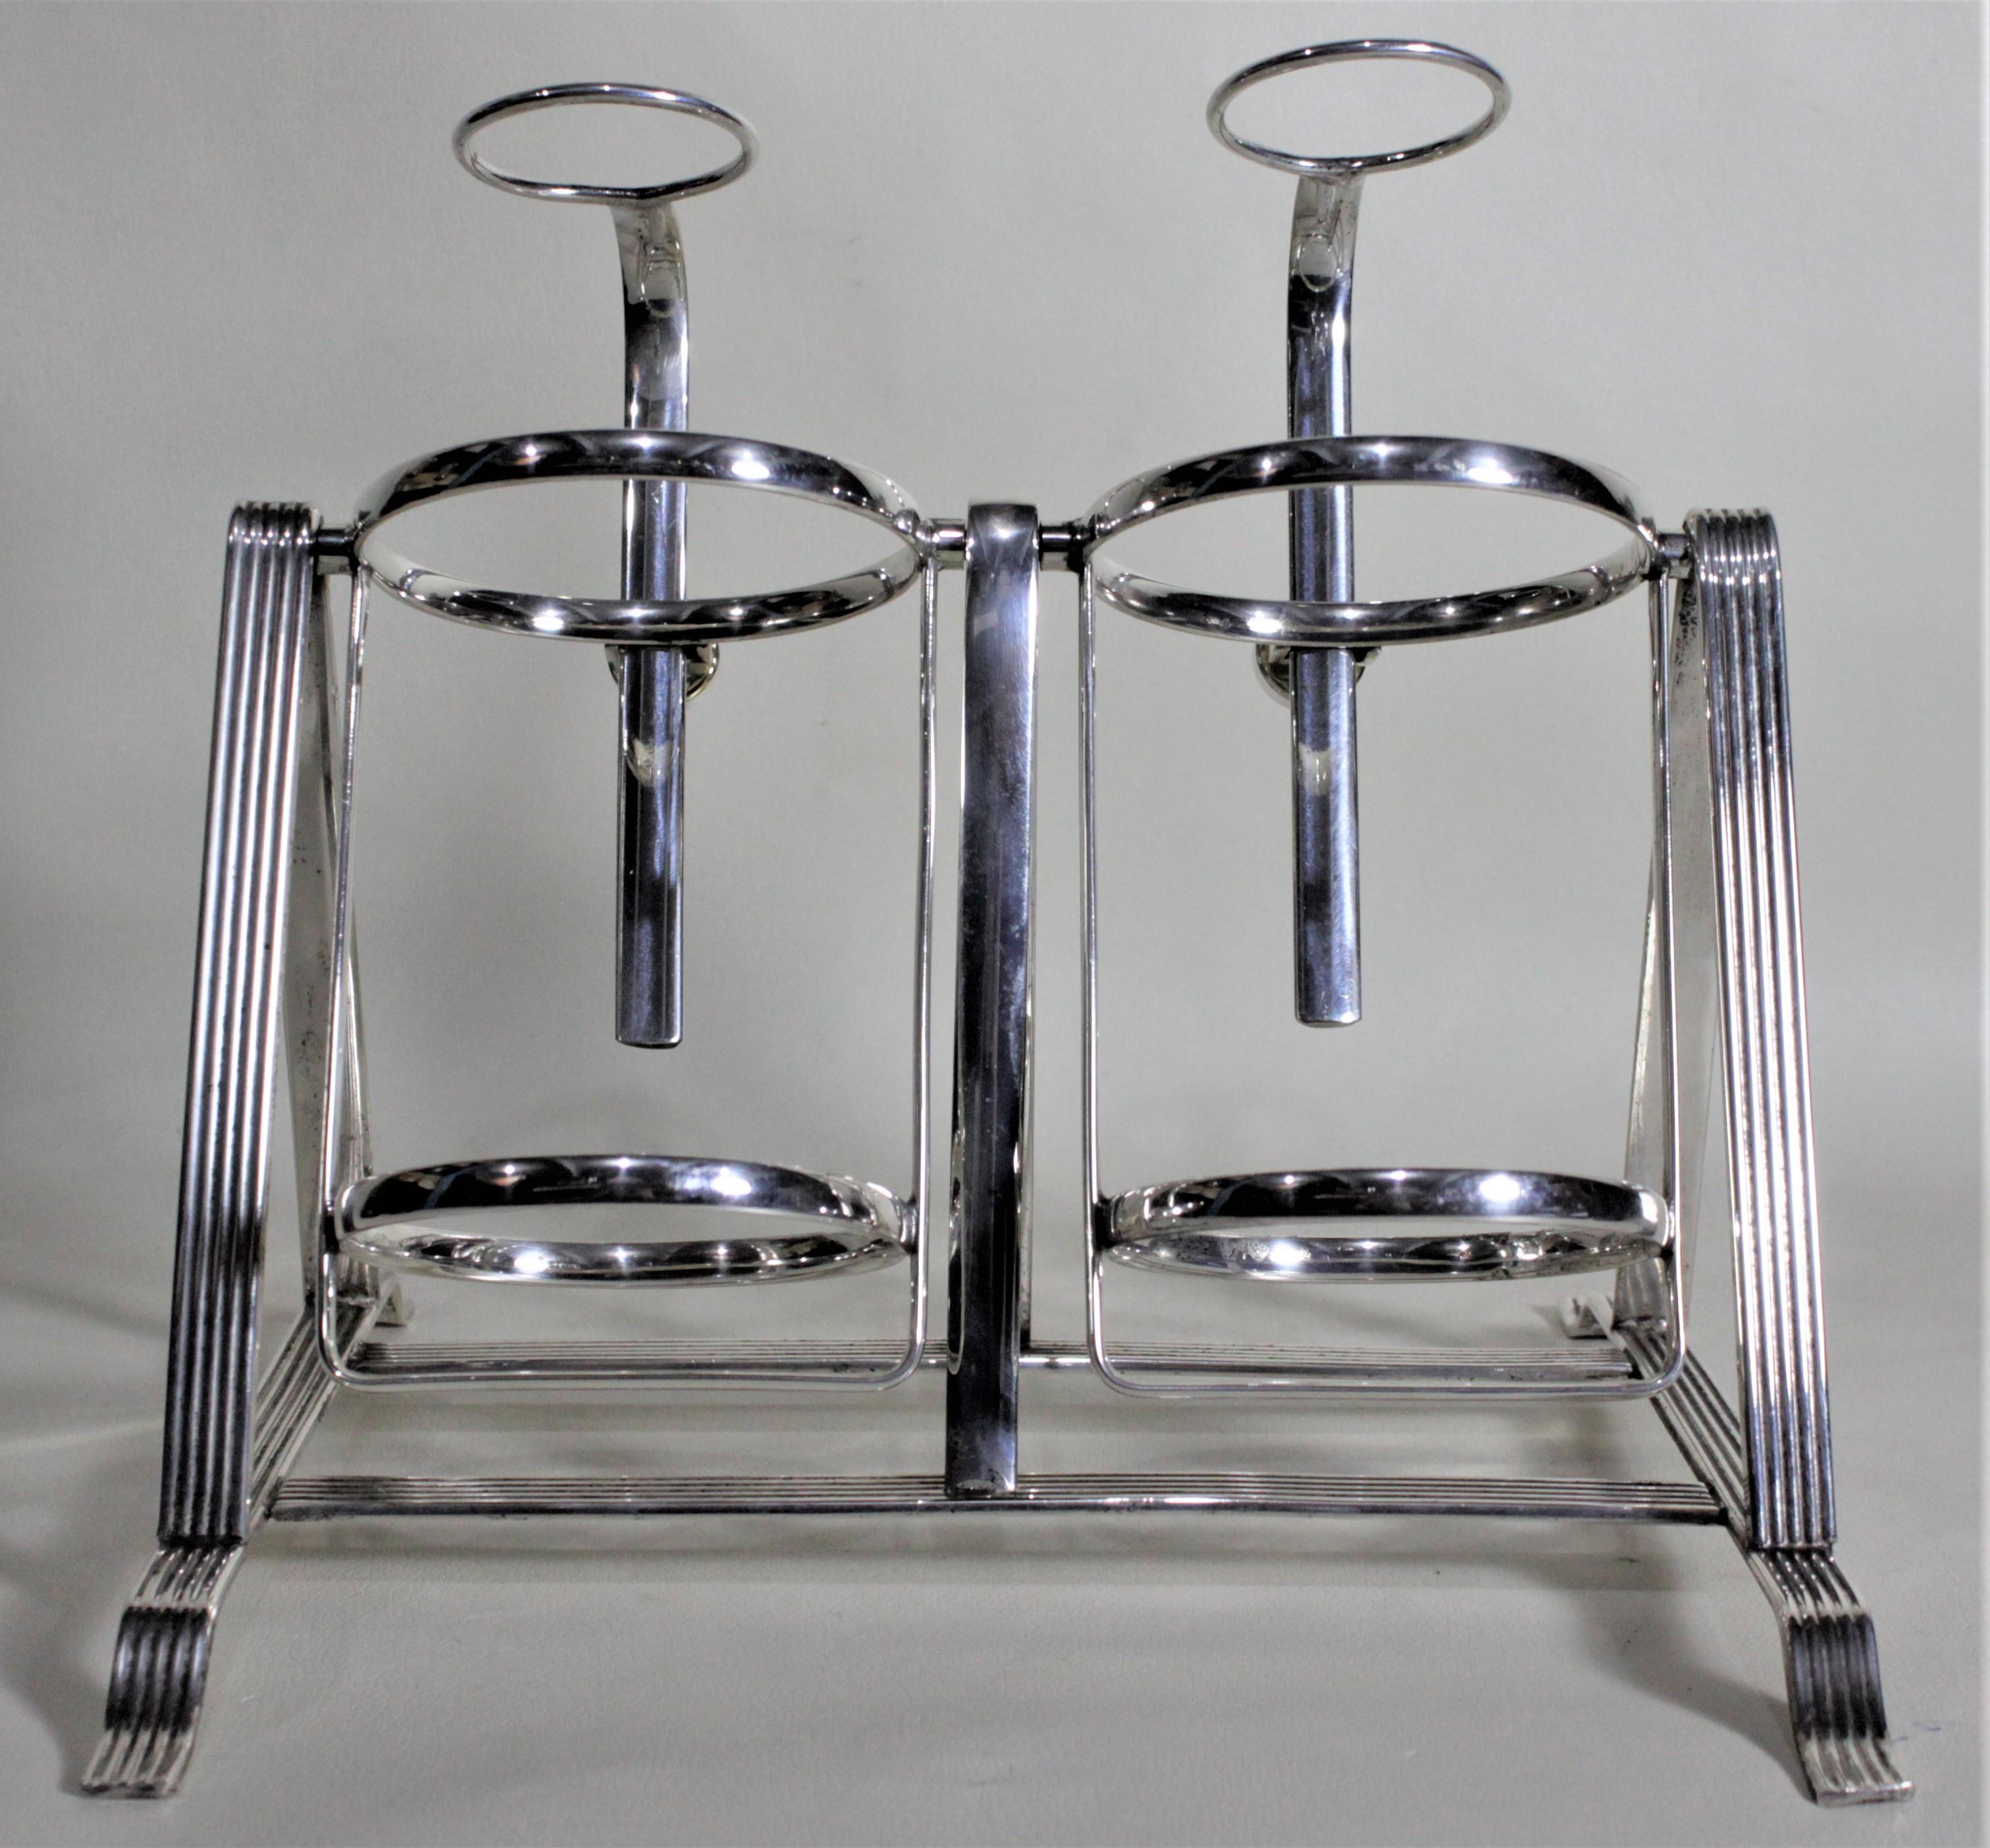 This silver plated decanter stand was made in Birmingham England by the Arnold E. Williams silversmiths in circa 1929 in the period Art Deco style. The stand holds two decanters or bottles of varying sizes and pivots so the contents can be poured by